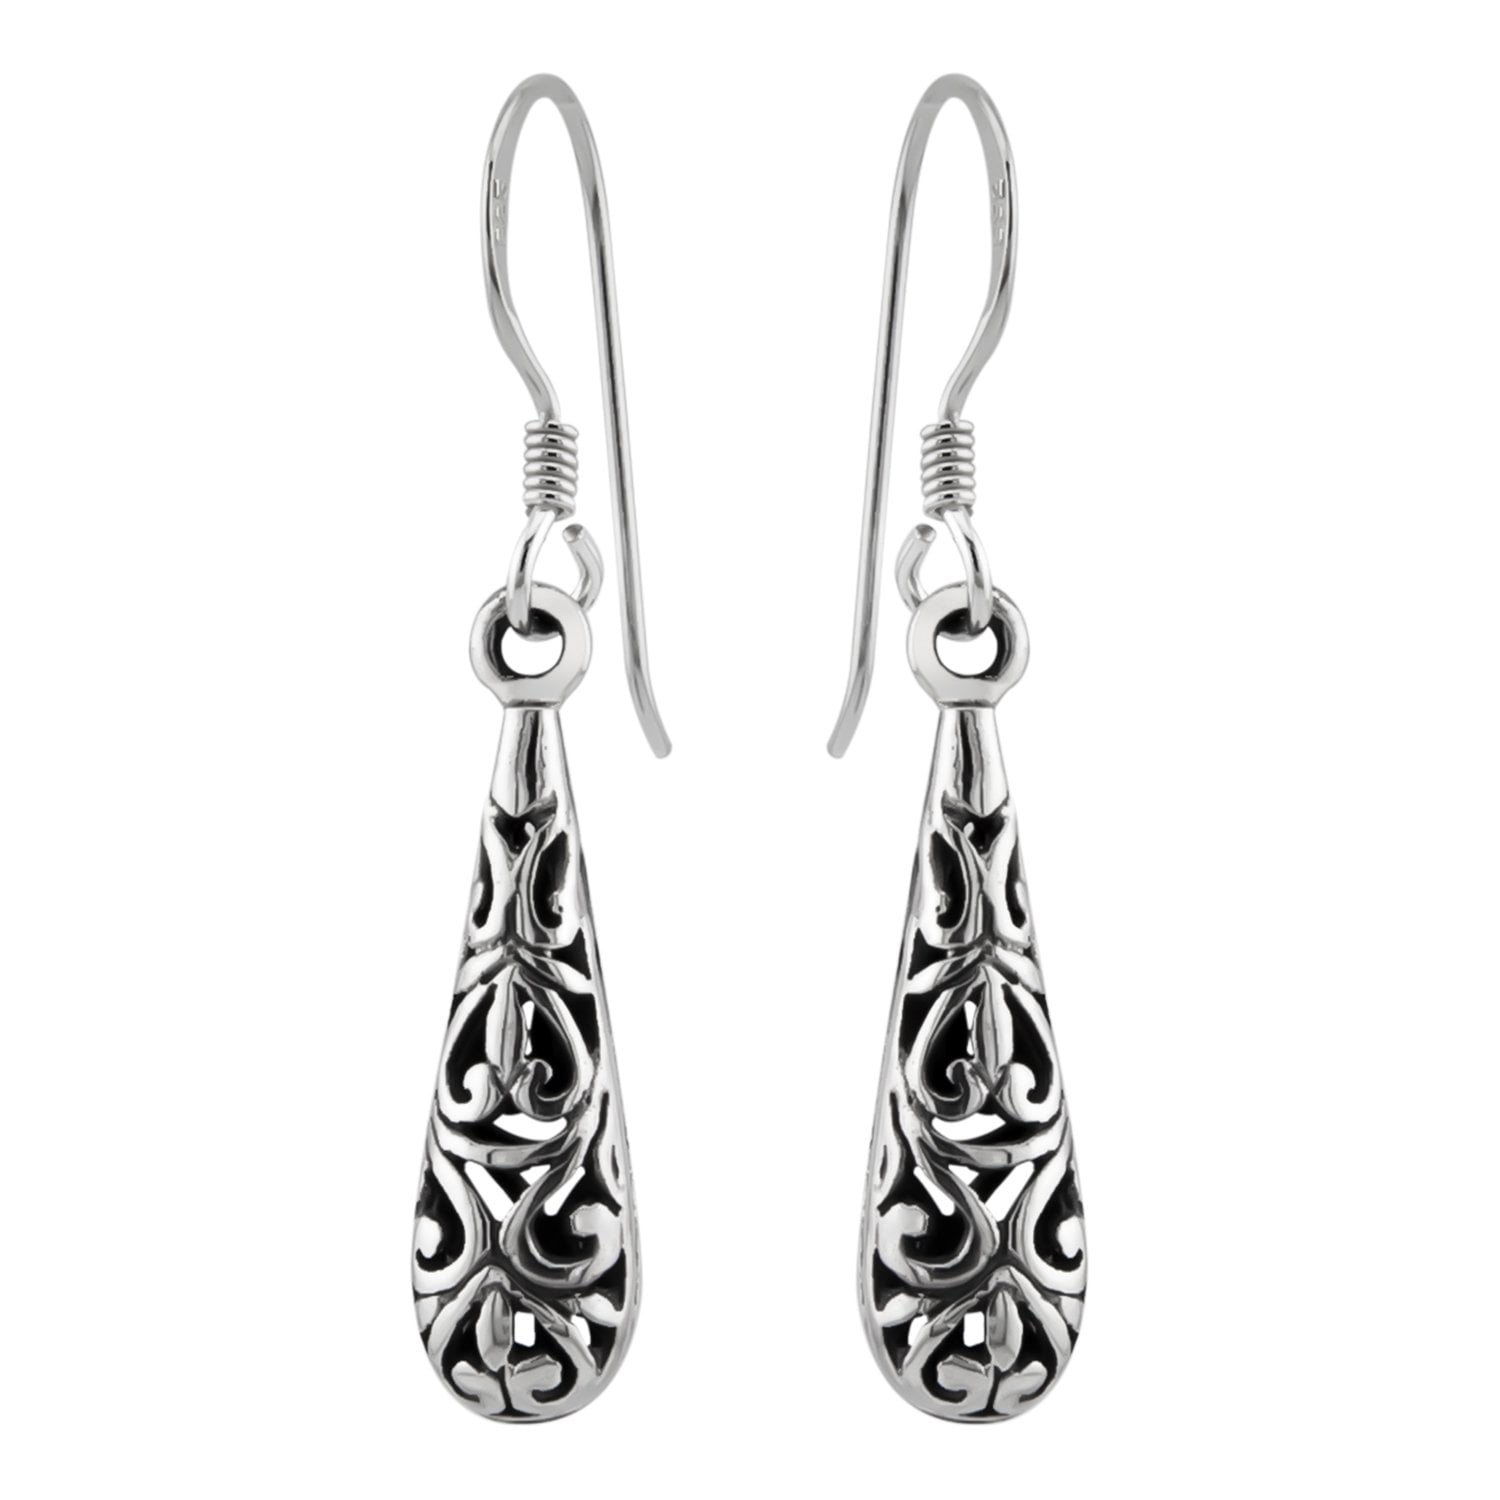 Agora Jewels Drop Pendant 925 Sterling Silver Charm Fish Hook Earrings for  Women, Girls, Jewelry Gift for Her, Mother, Wife, etc. 